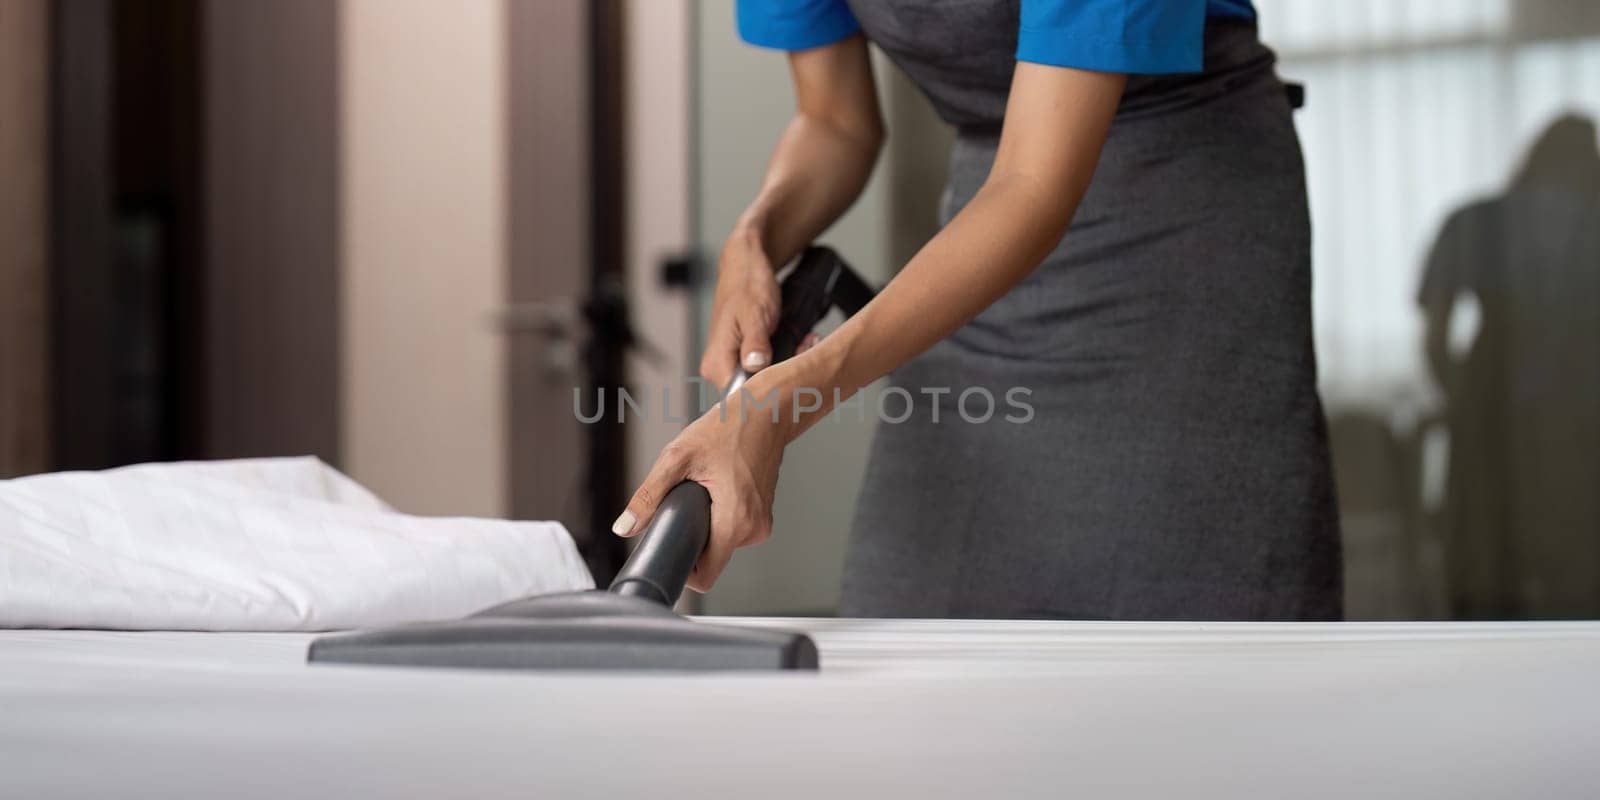 Cleaning service employee removing dirt from with professional equipment. Female housekeeper cleaning the mattress on the bed with vacuum cleaner.